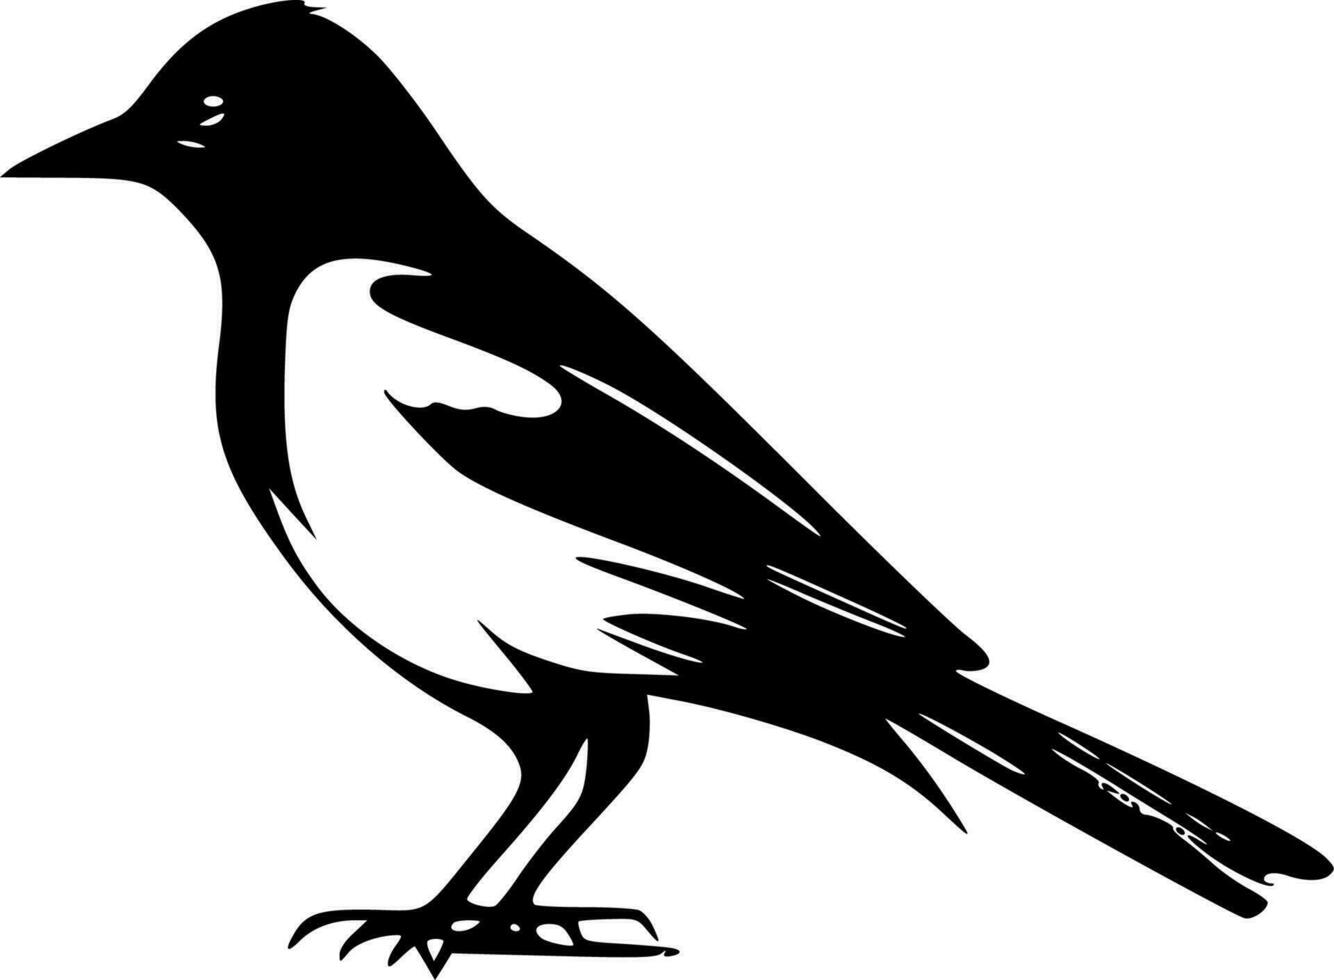 Magpie, Black and White Vector illustration